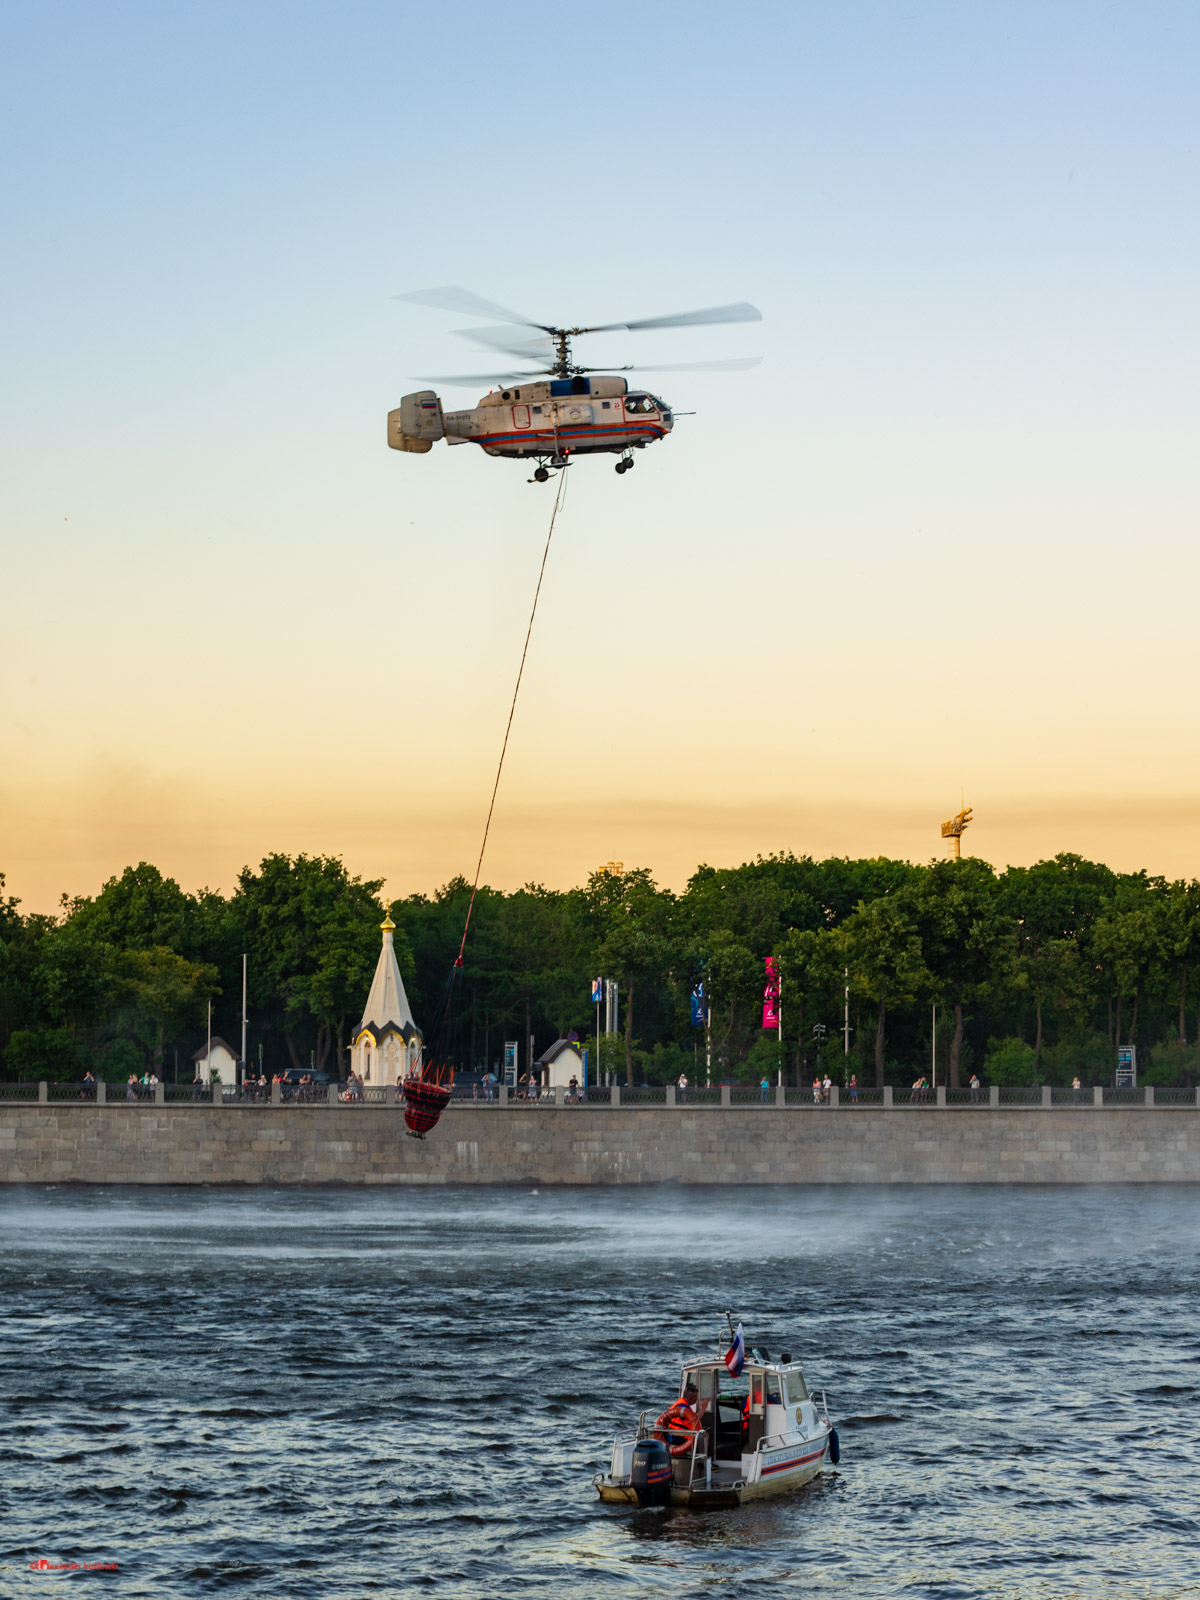 Helicopter takes water to extinguish the fire